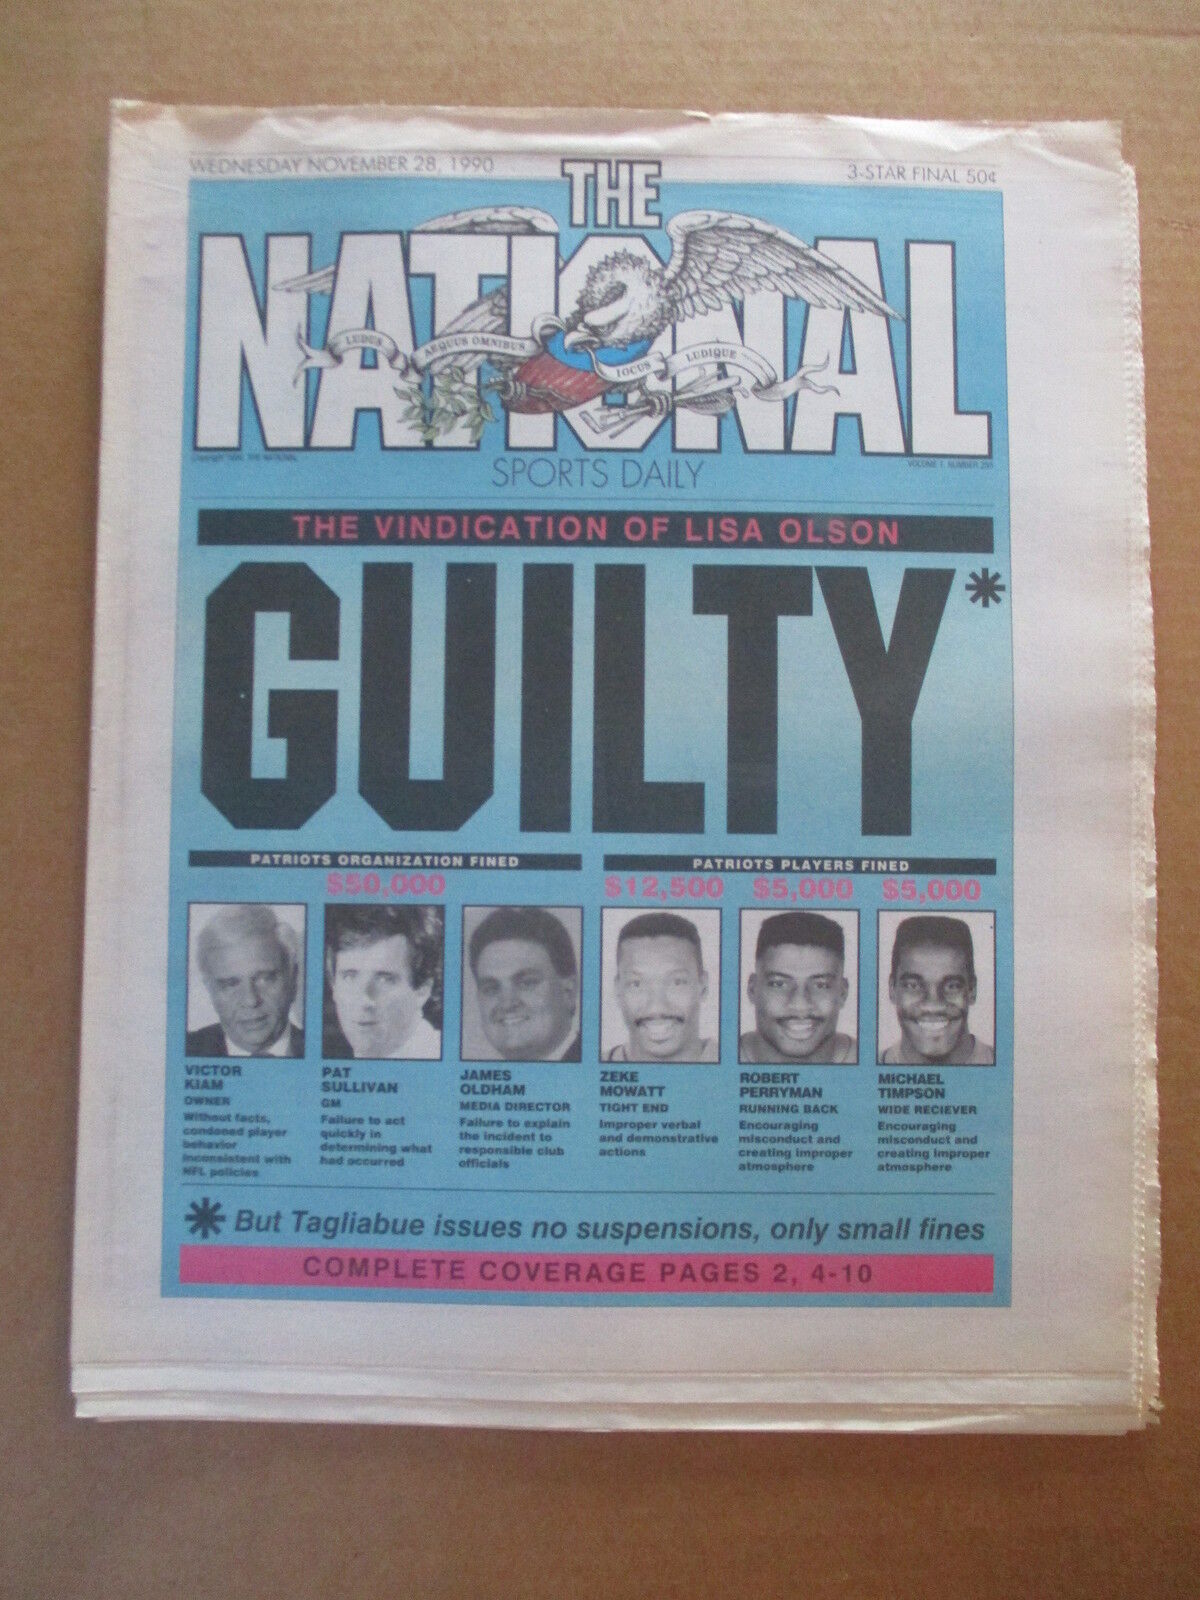 THE NATIONAL SPORTS DAILY NEWSPAPER NEW ENGLAND PATRIOTS GUILTY 11/28 1990